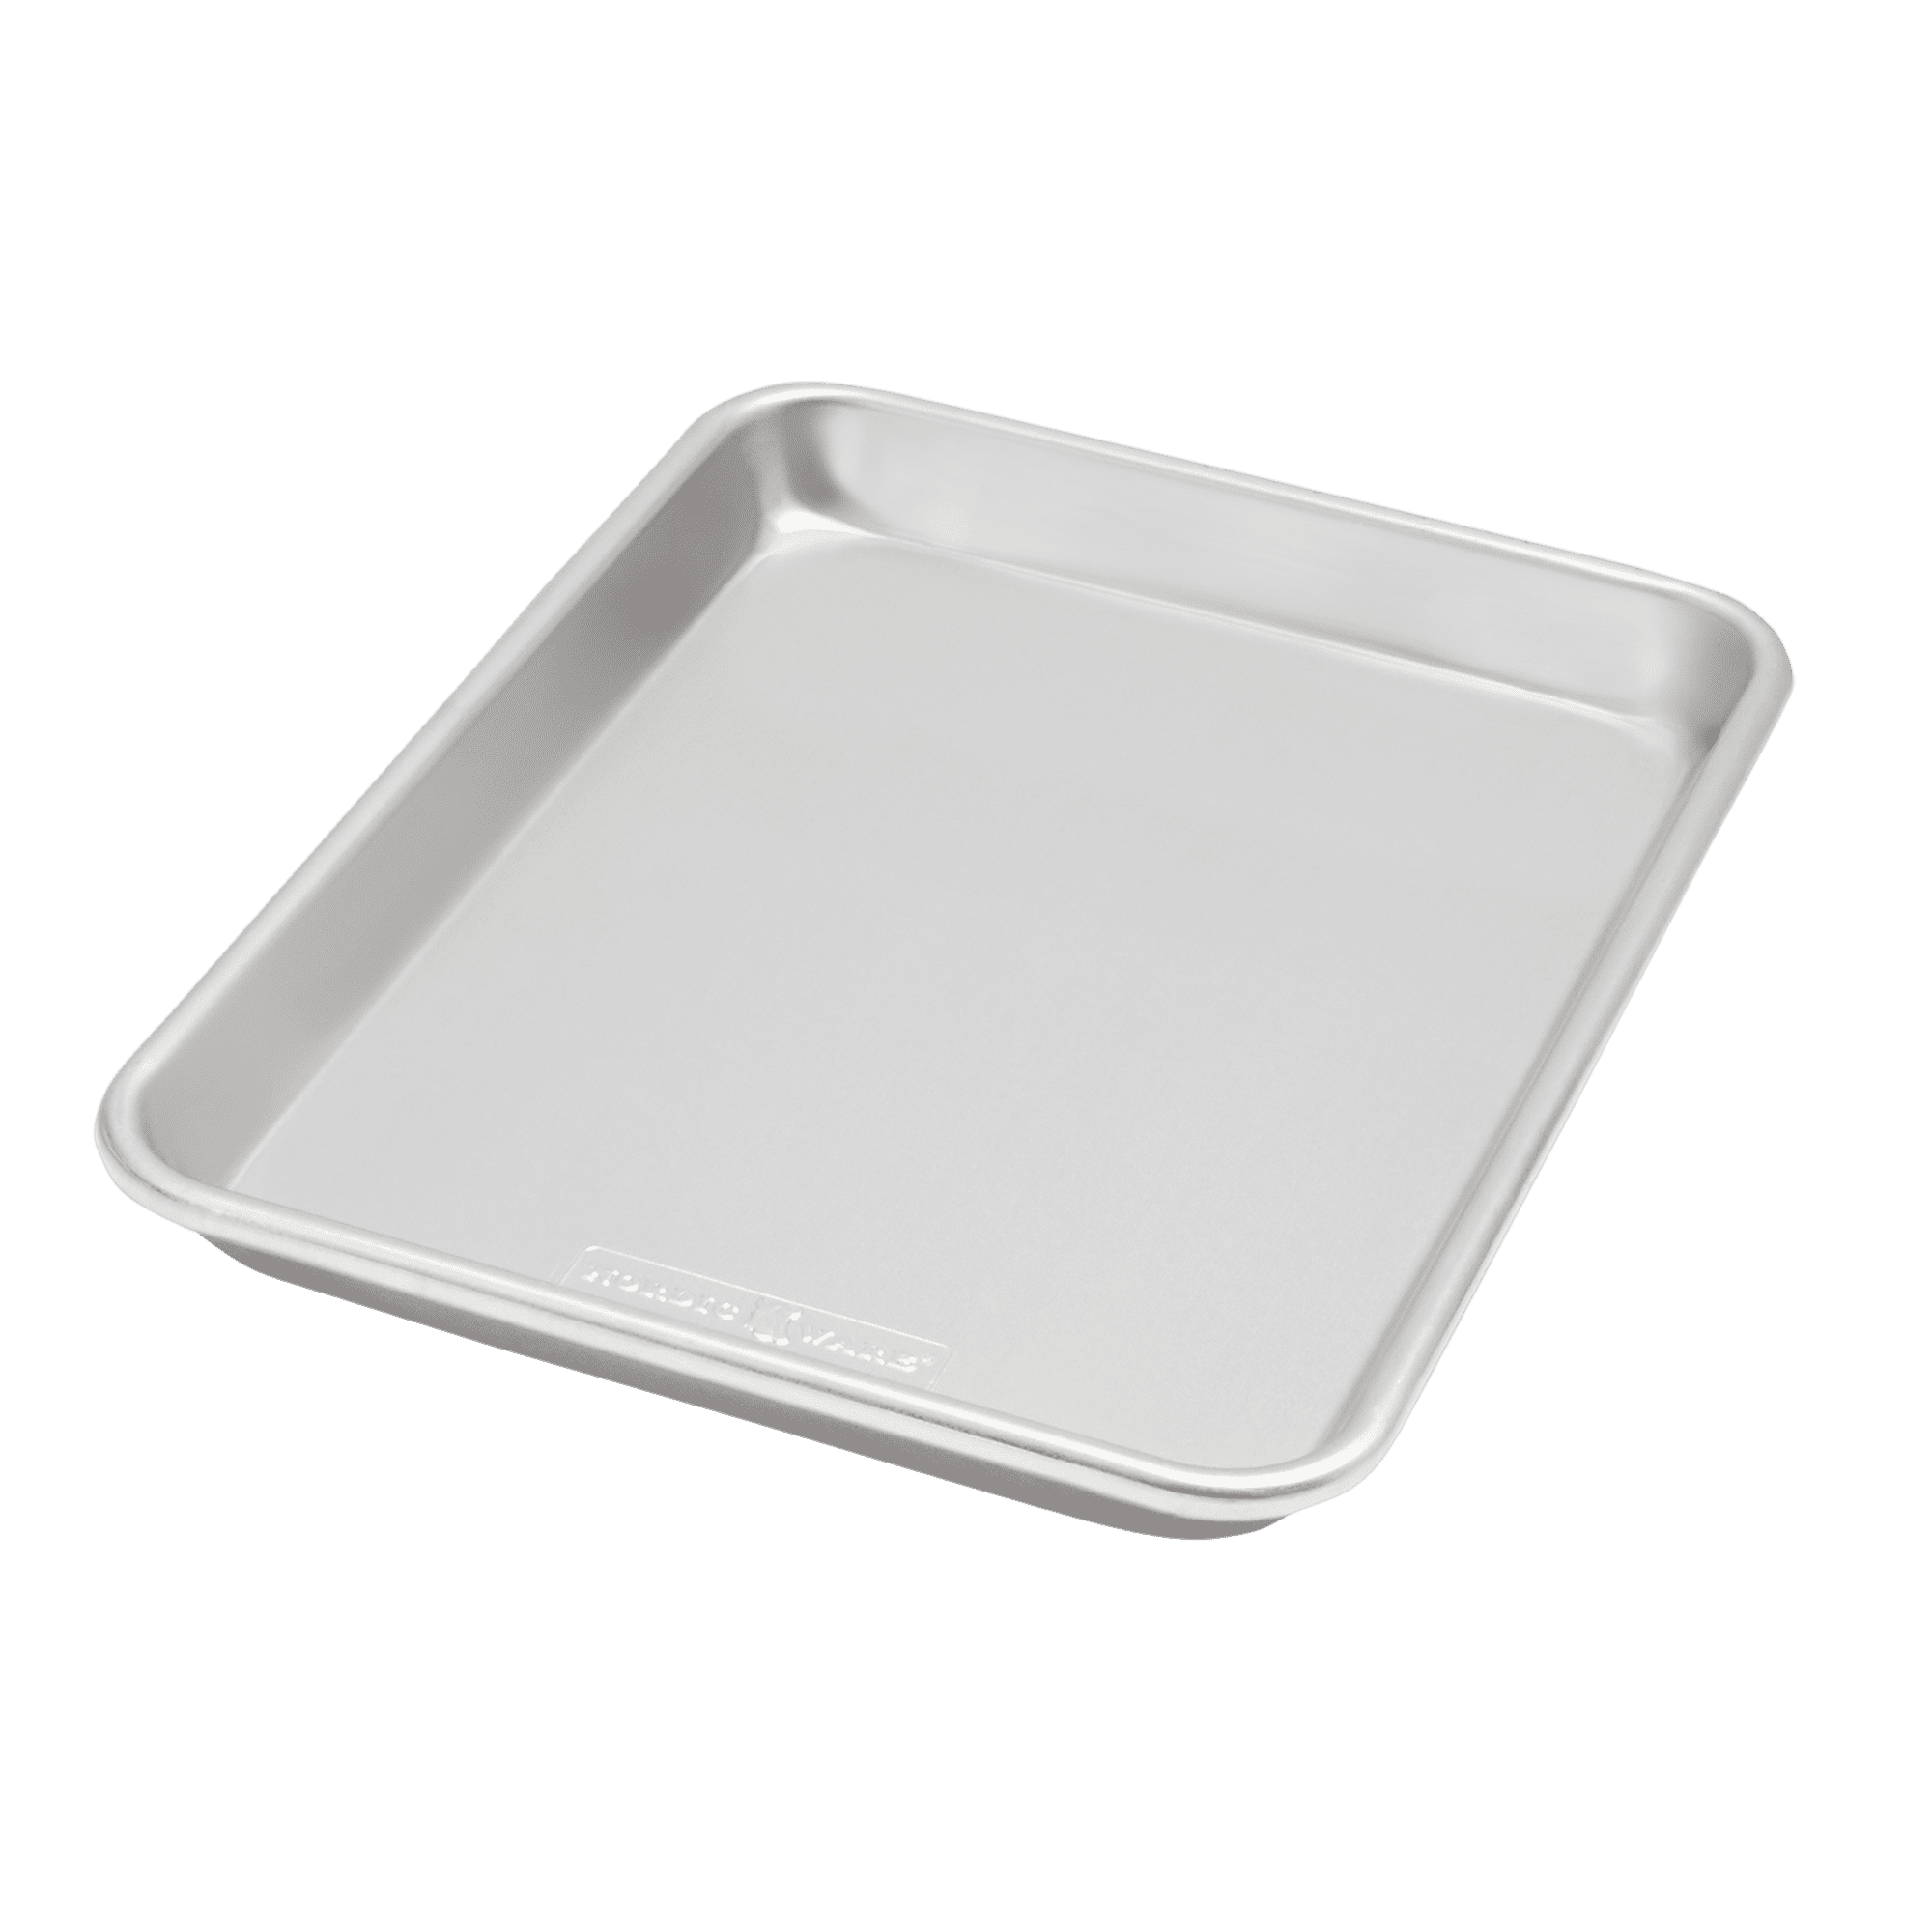 What Are Quarter and Eighth Sheet Pans Used For?